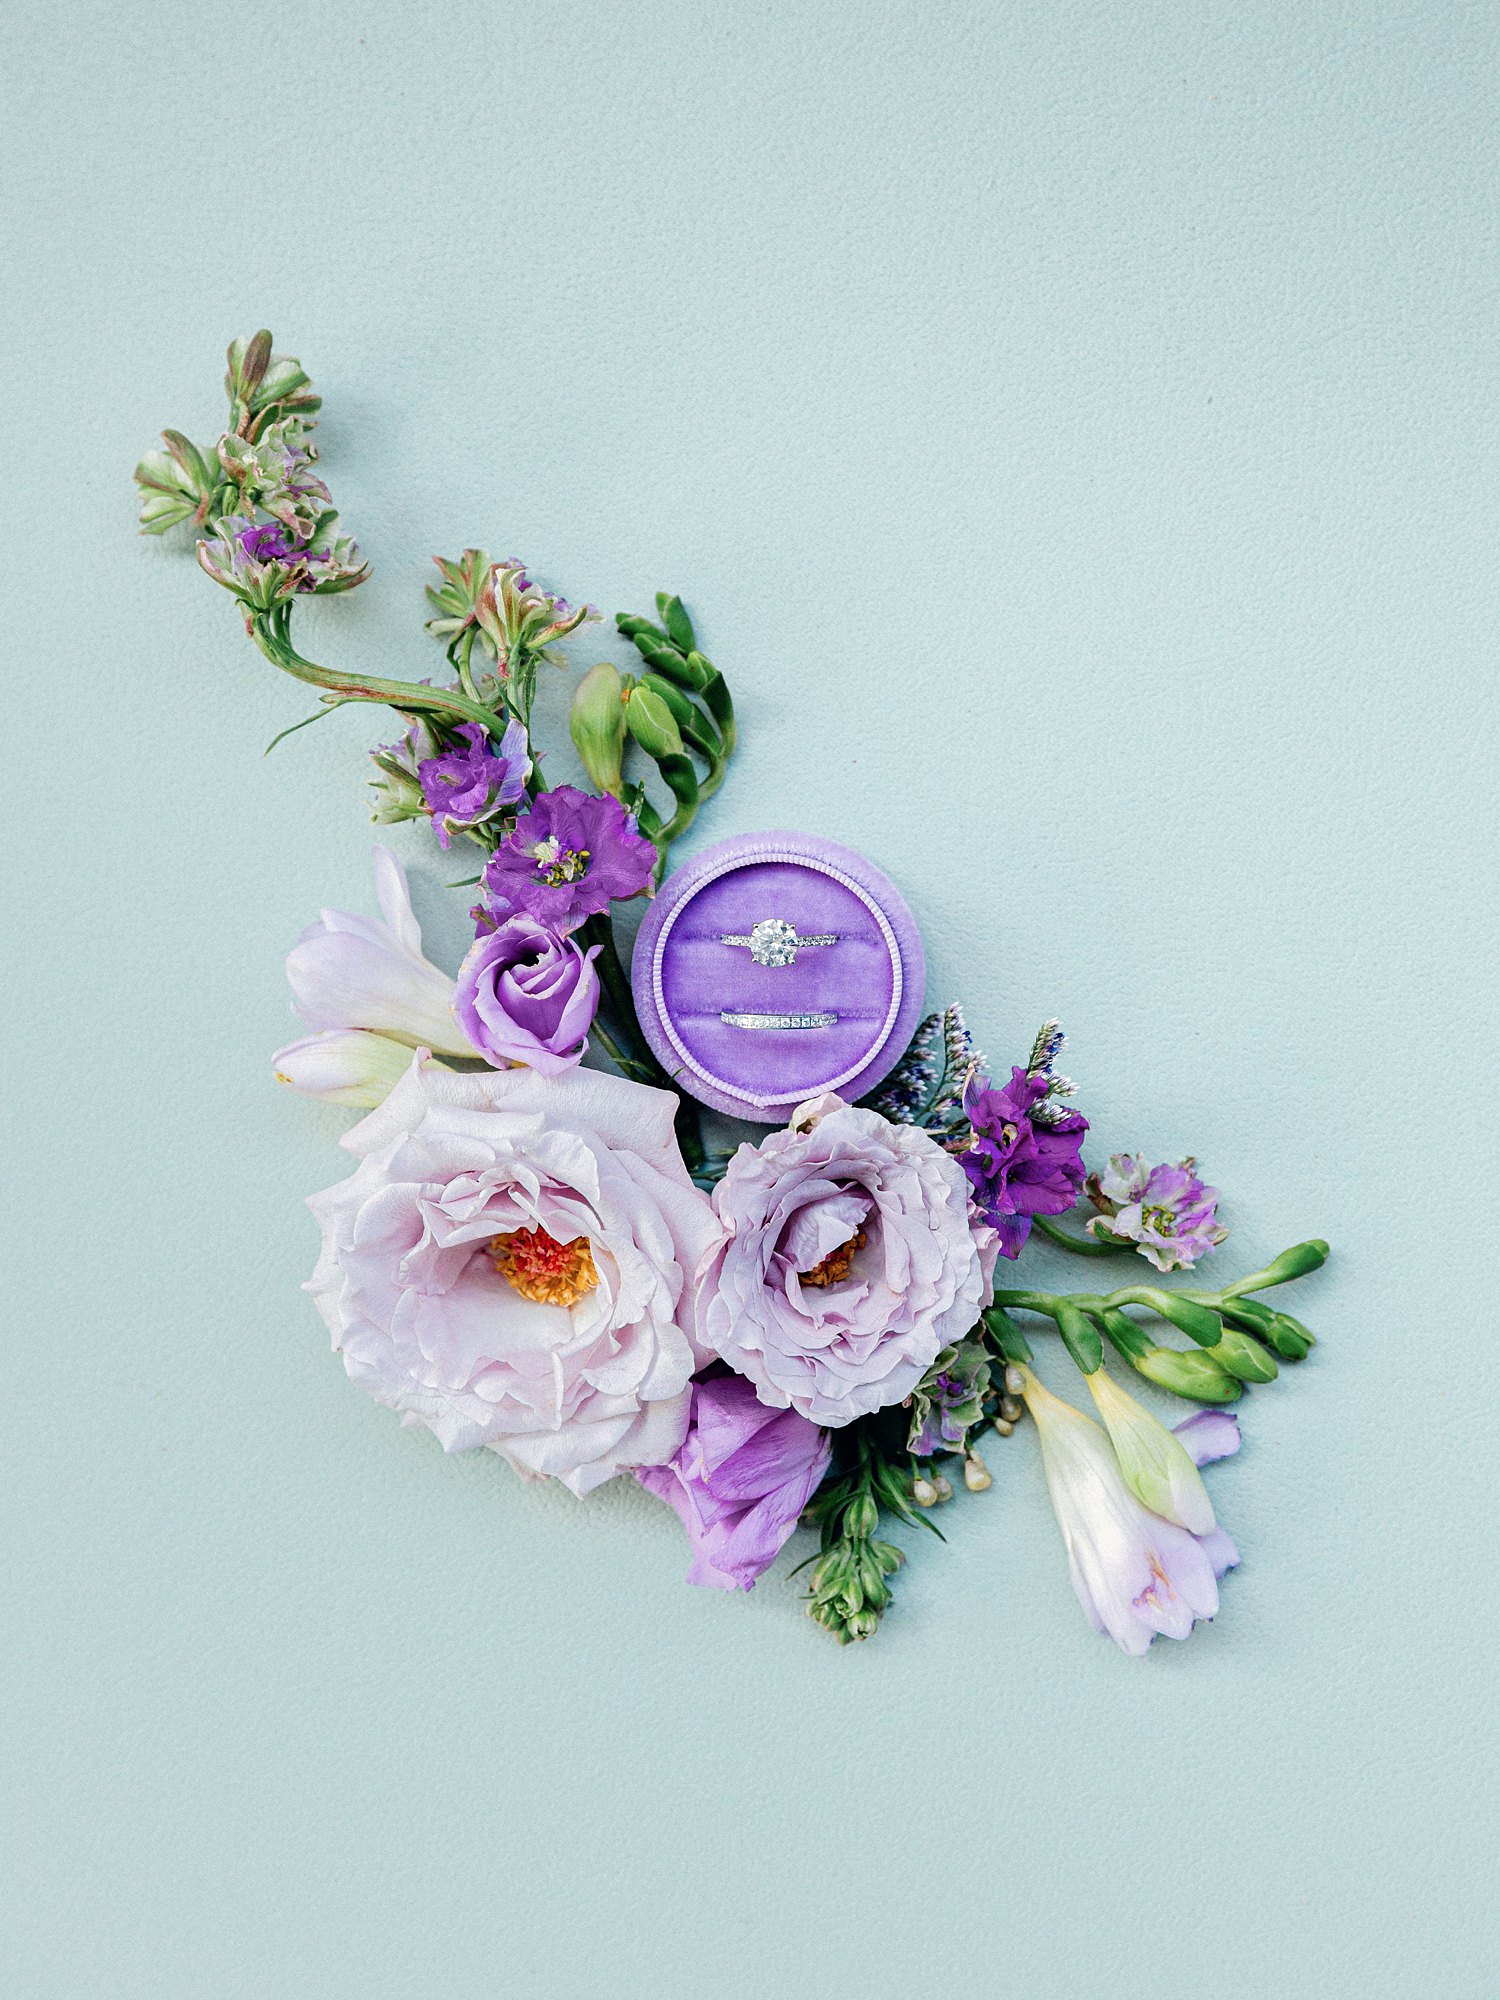 diamond engagement ring and wedding band in round purple ring box sitting among purple flowers against a green background flat lay 